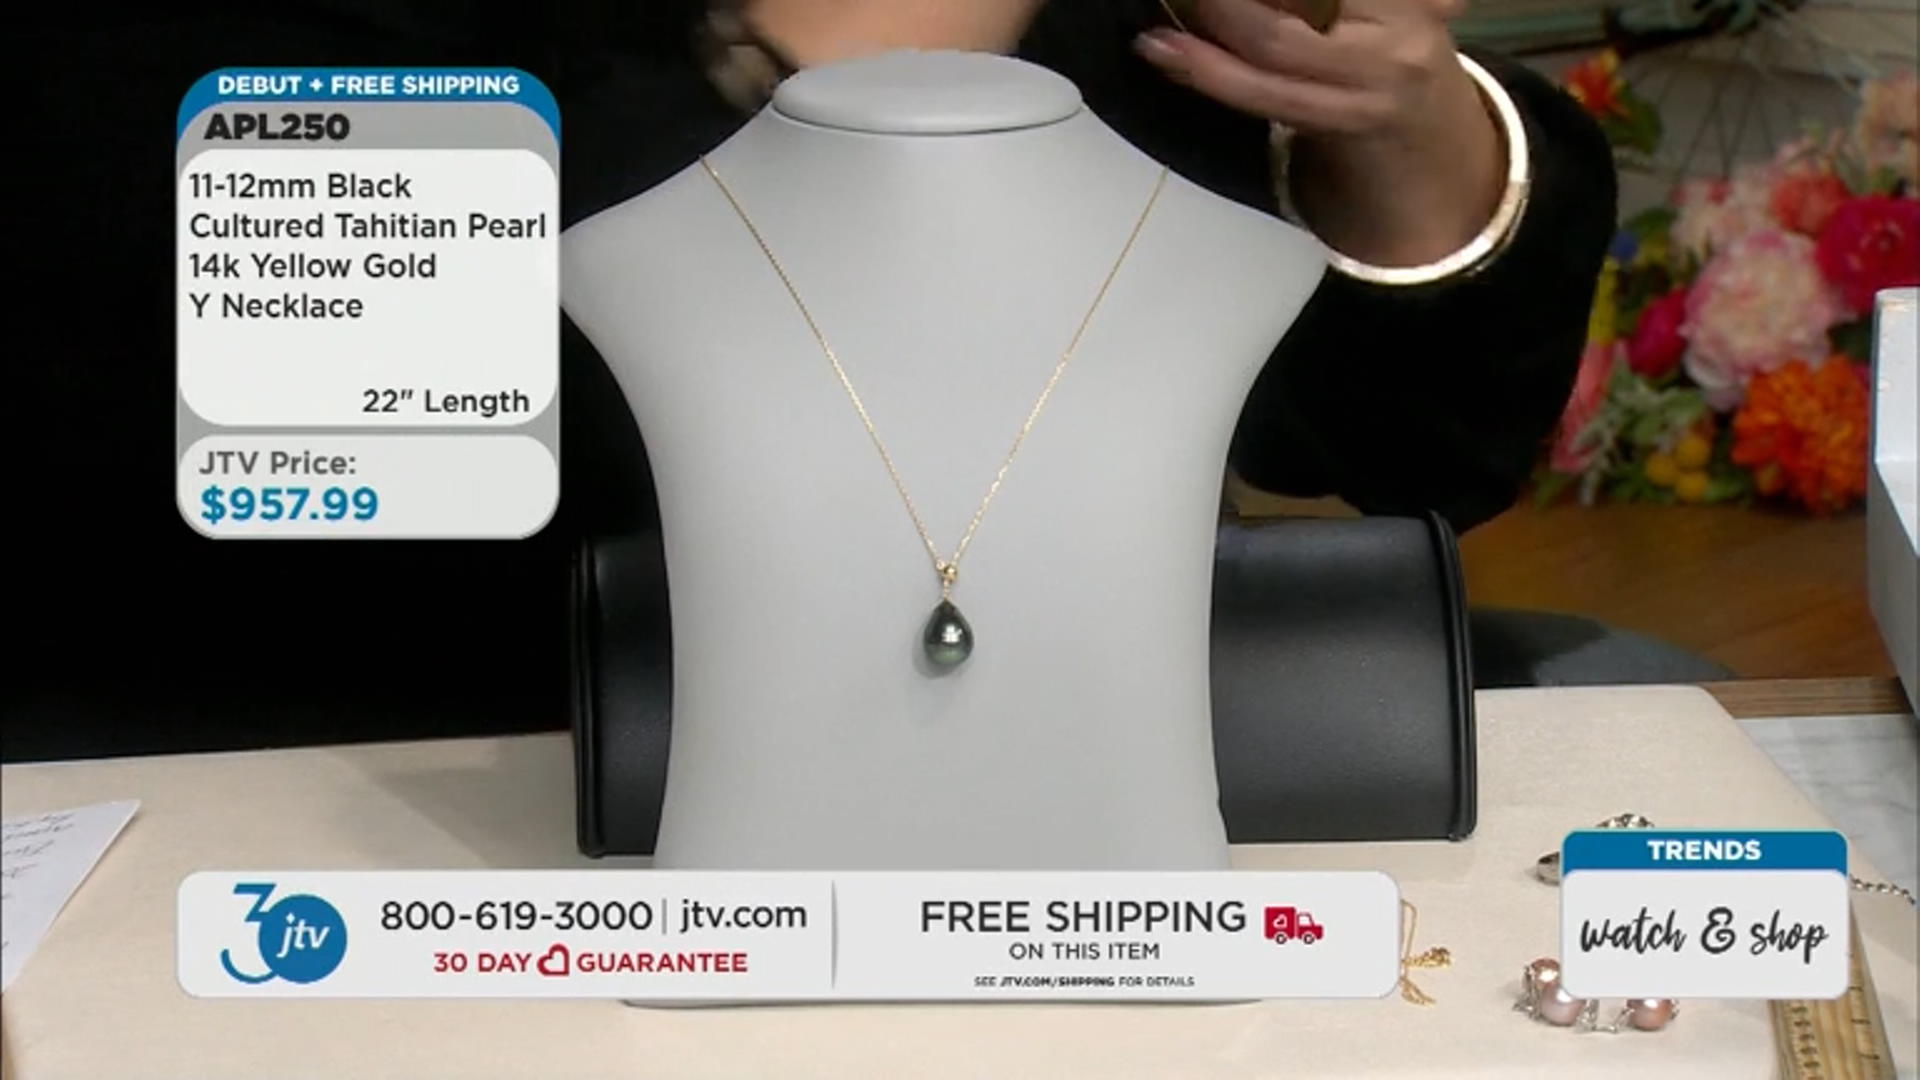 Black Cultured Tahitian Pearl 14k Yellow Gold Y Necklace Video Thumbnail